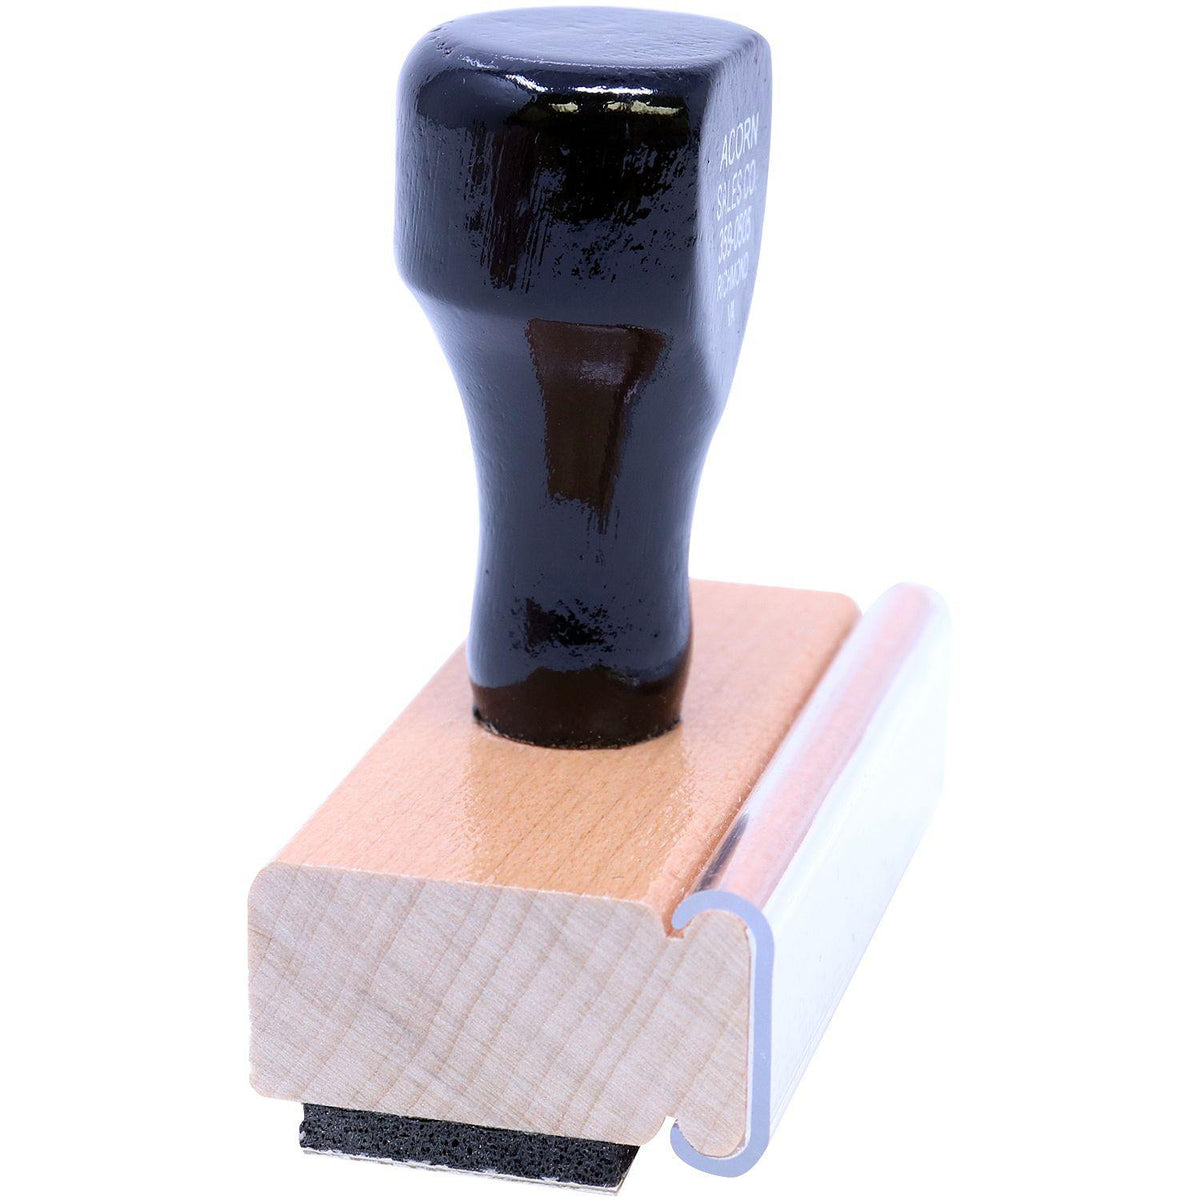 Plaintiffs Exhibit Rubber Stamp - Engineer Seal Stamps - Brand_Acorn, Impression Size_Small, Stamp Type_Regular Stamp, Type of Use_Legal